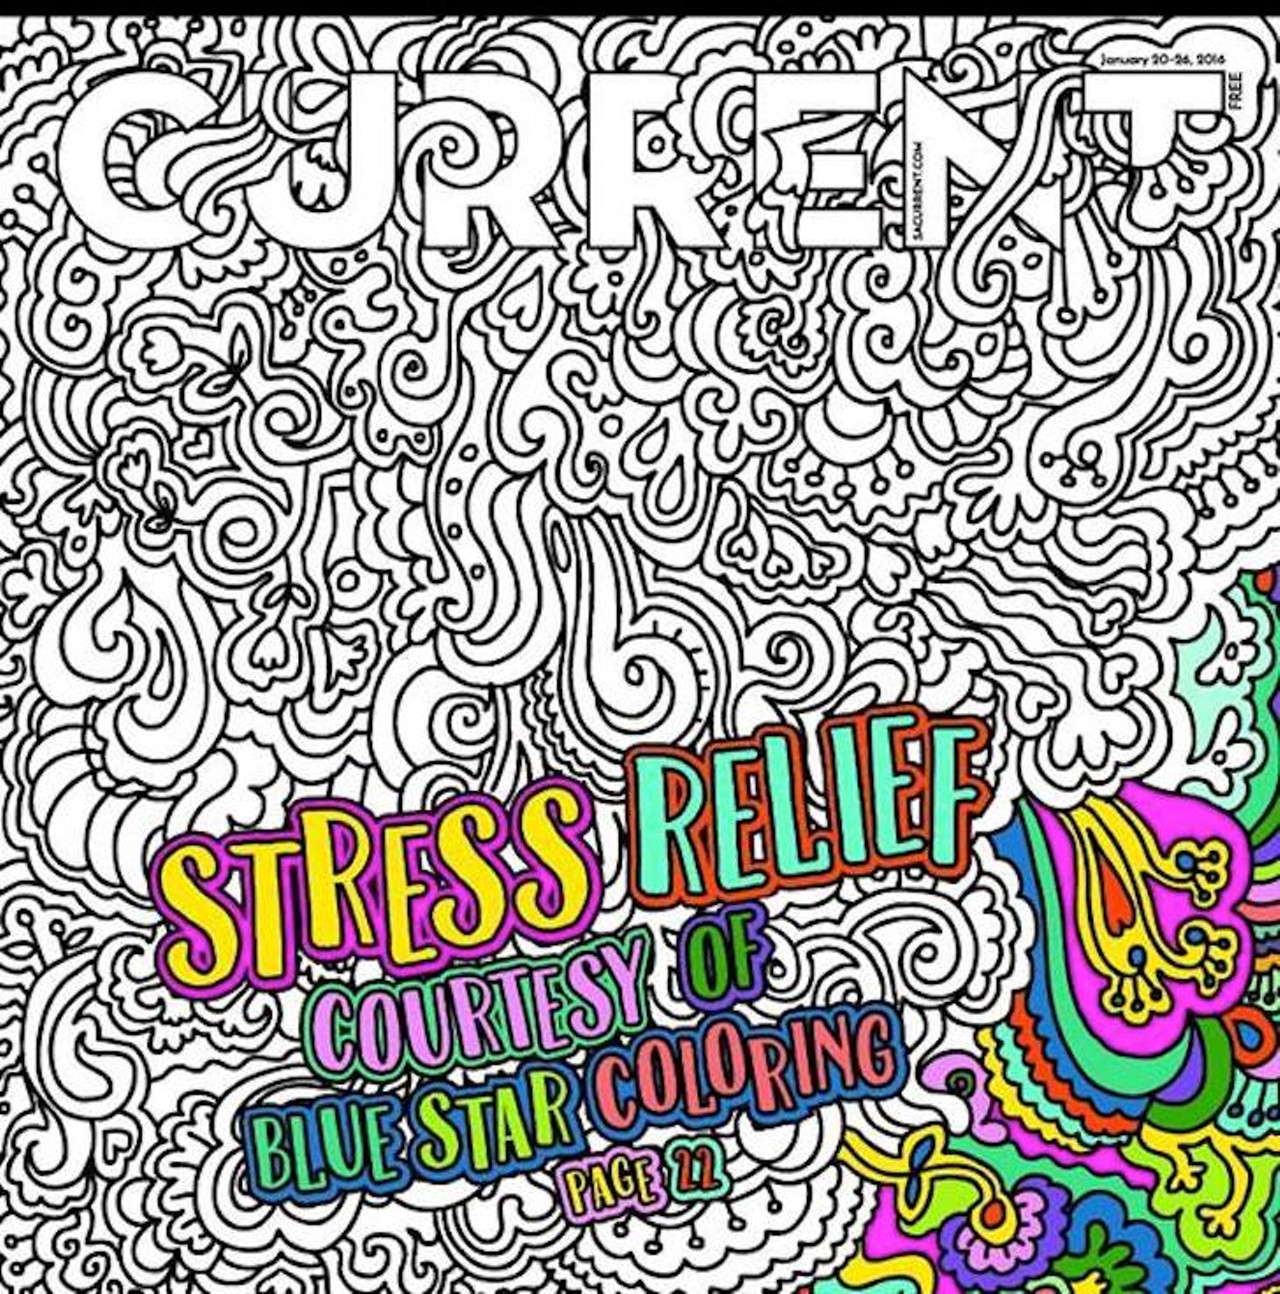 Color the coloring book issue of the Current to quell the anxiety of still being single at your age. 
Photo via San Antonio Current